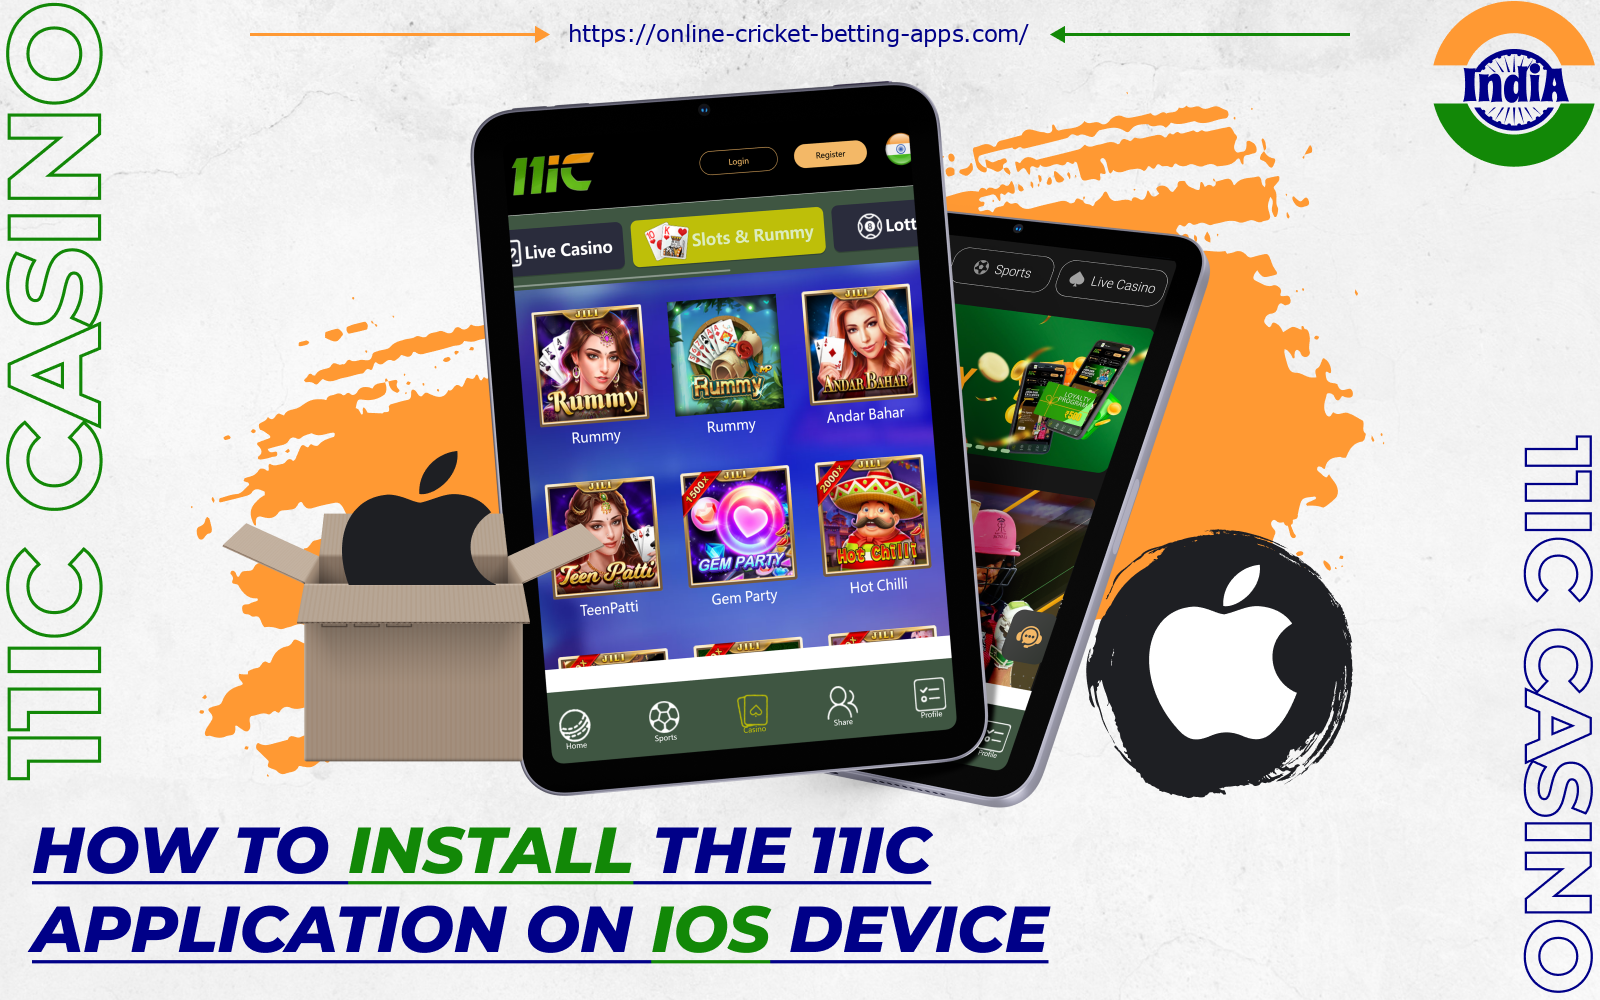 Indian bettors with iOS devices can install the 11ic app and bet at any time